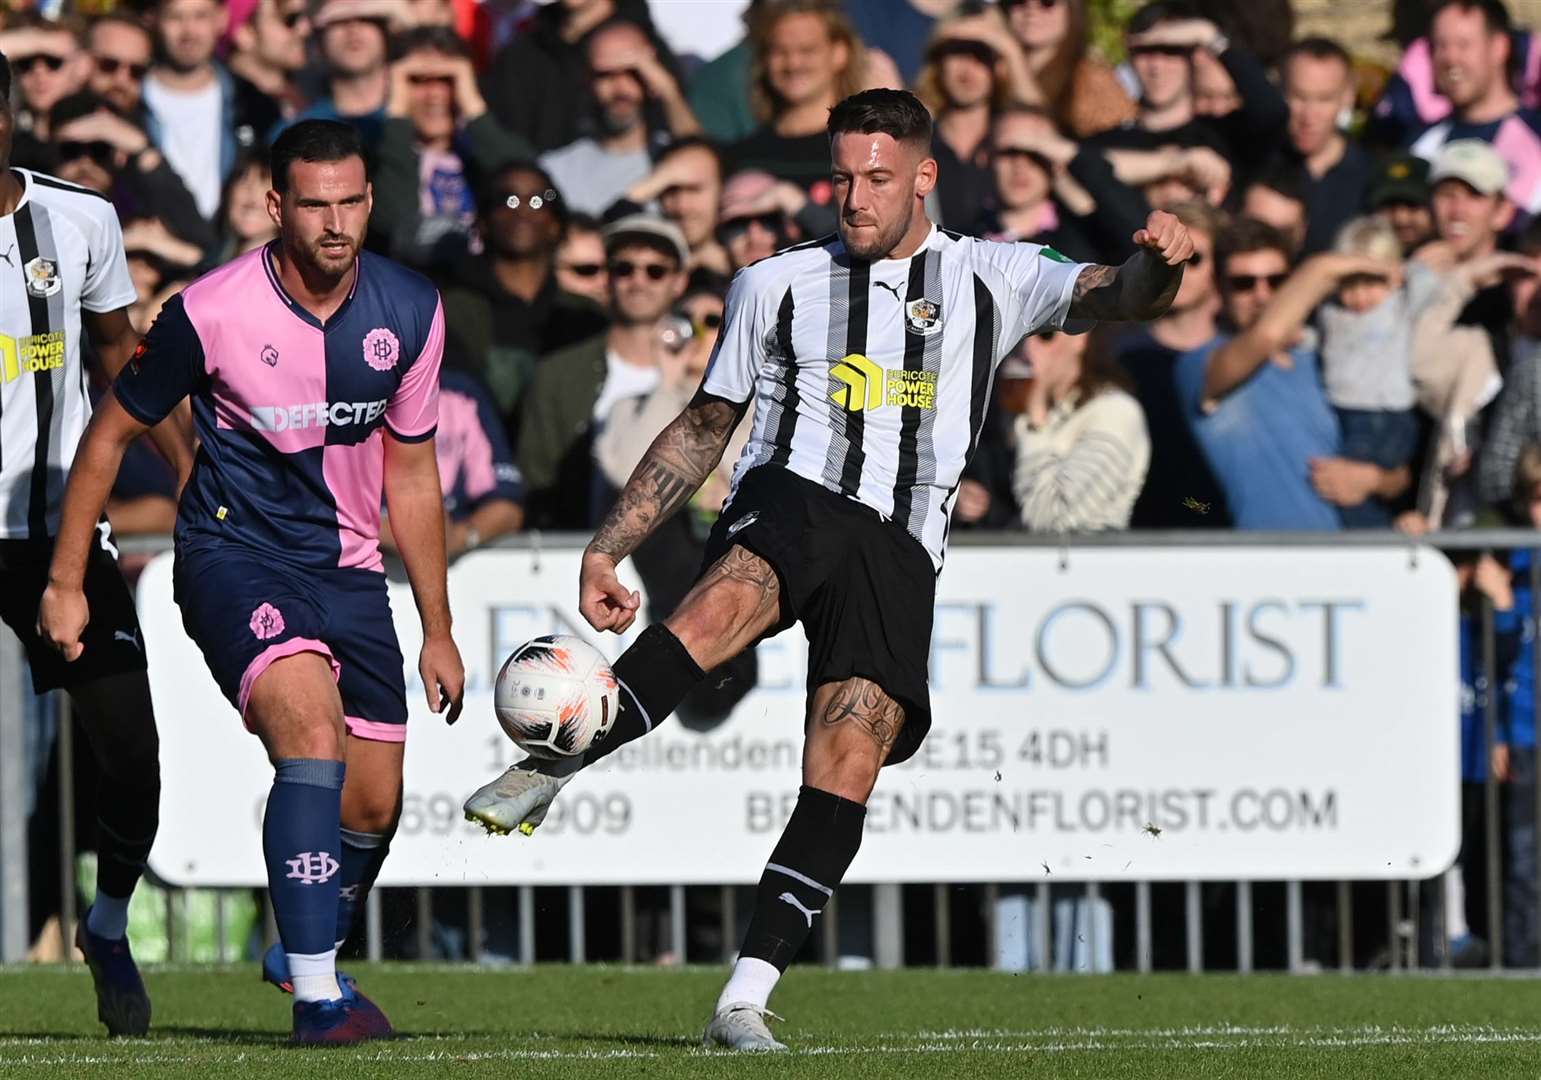 Striker Alex Wall scored to earn Dartford a point at Hungerford in Tuesday's 1-1 draw. Picture: Keith Gillard